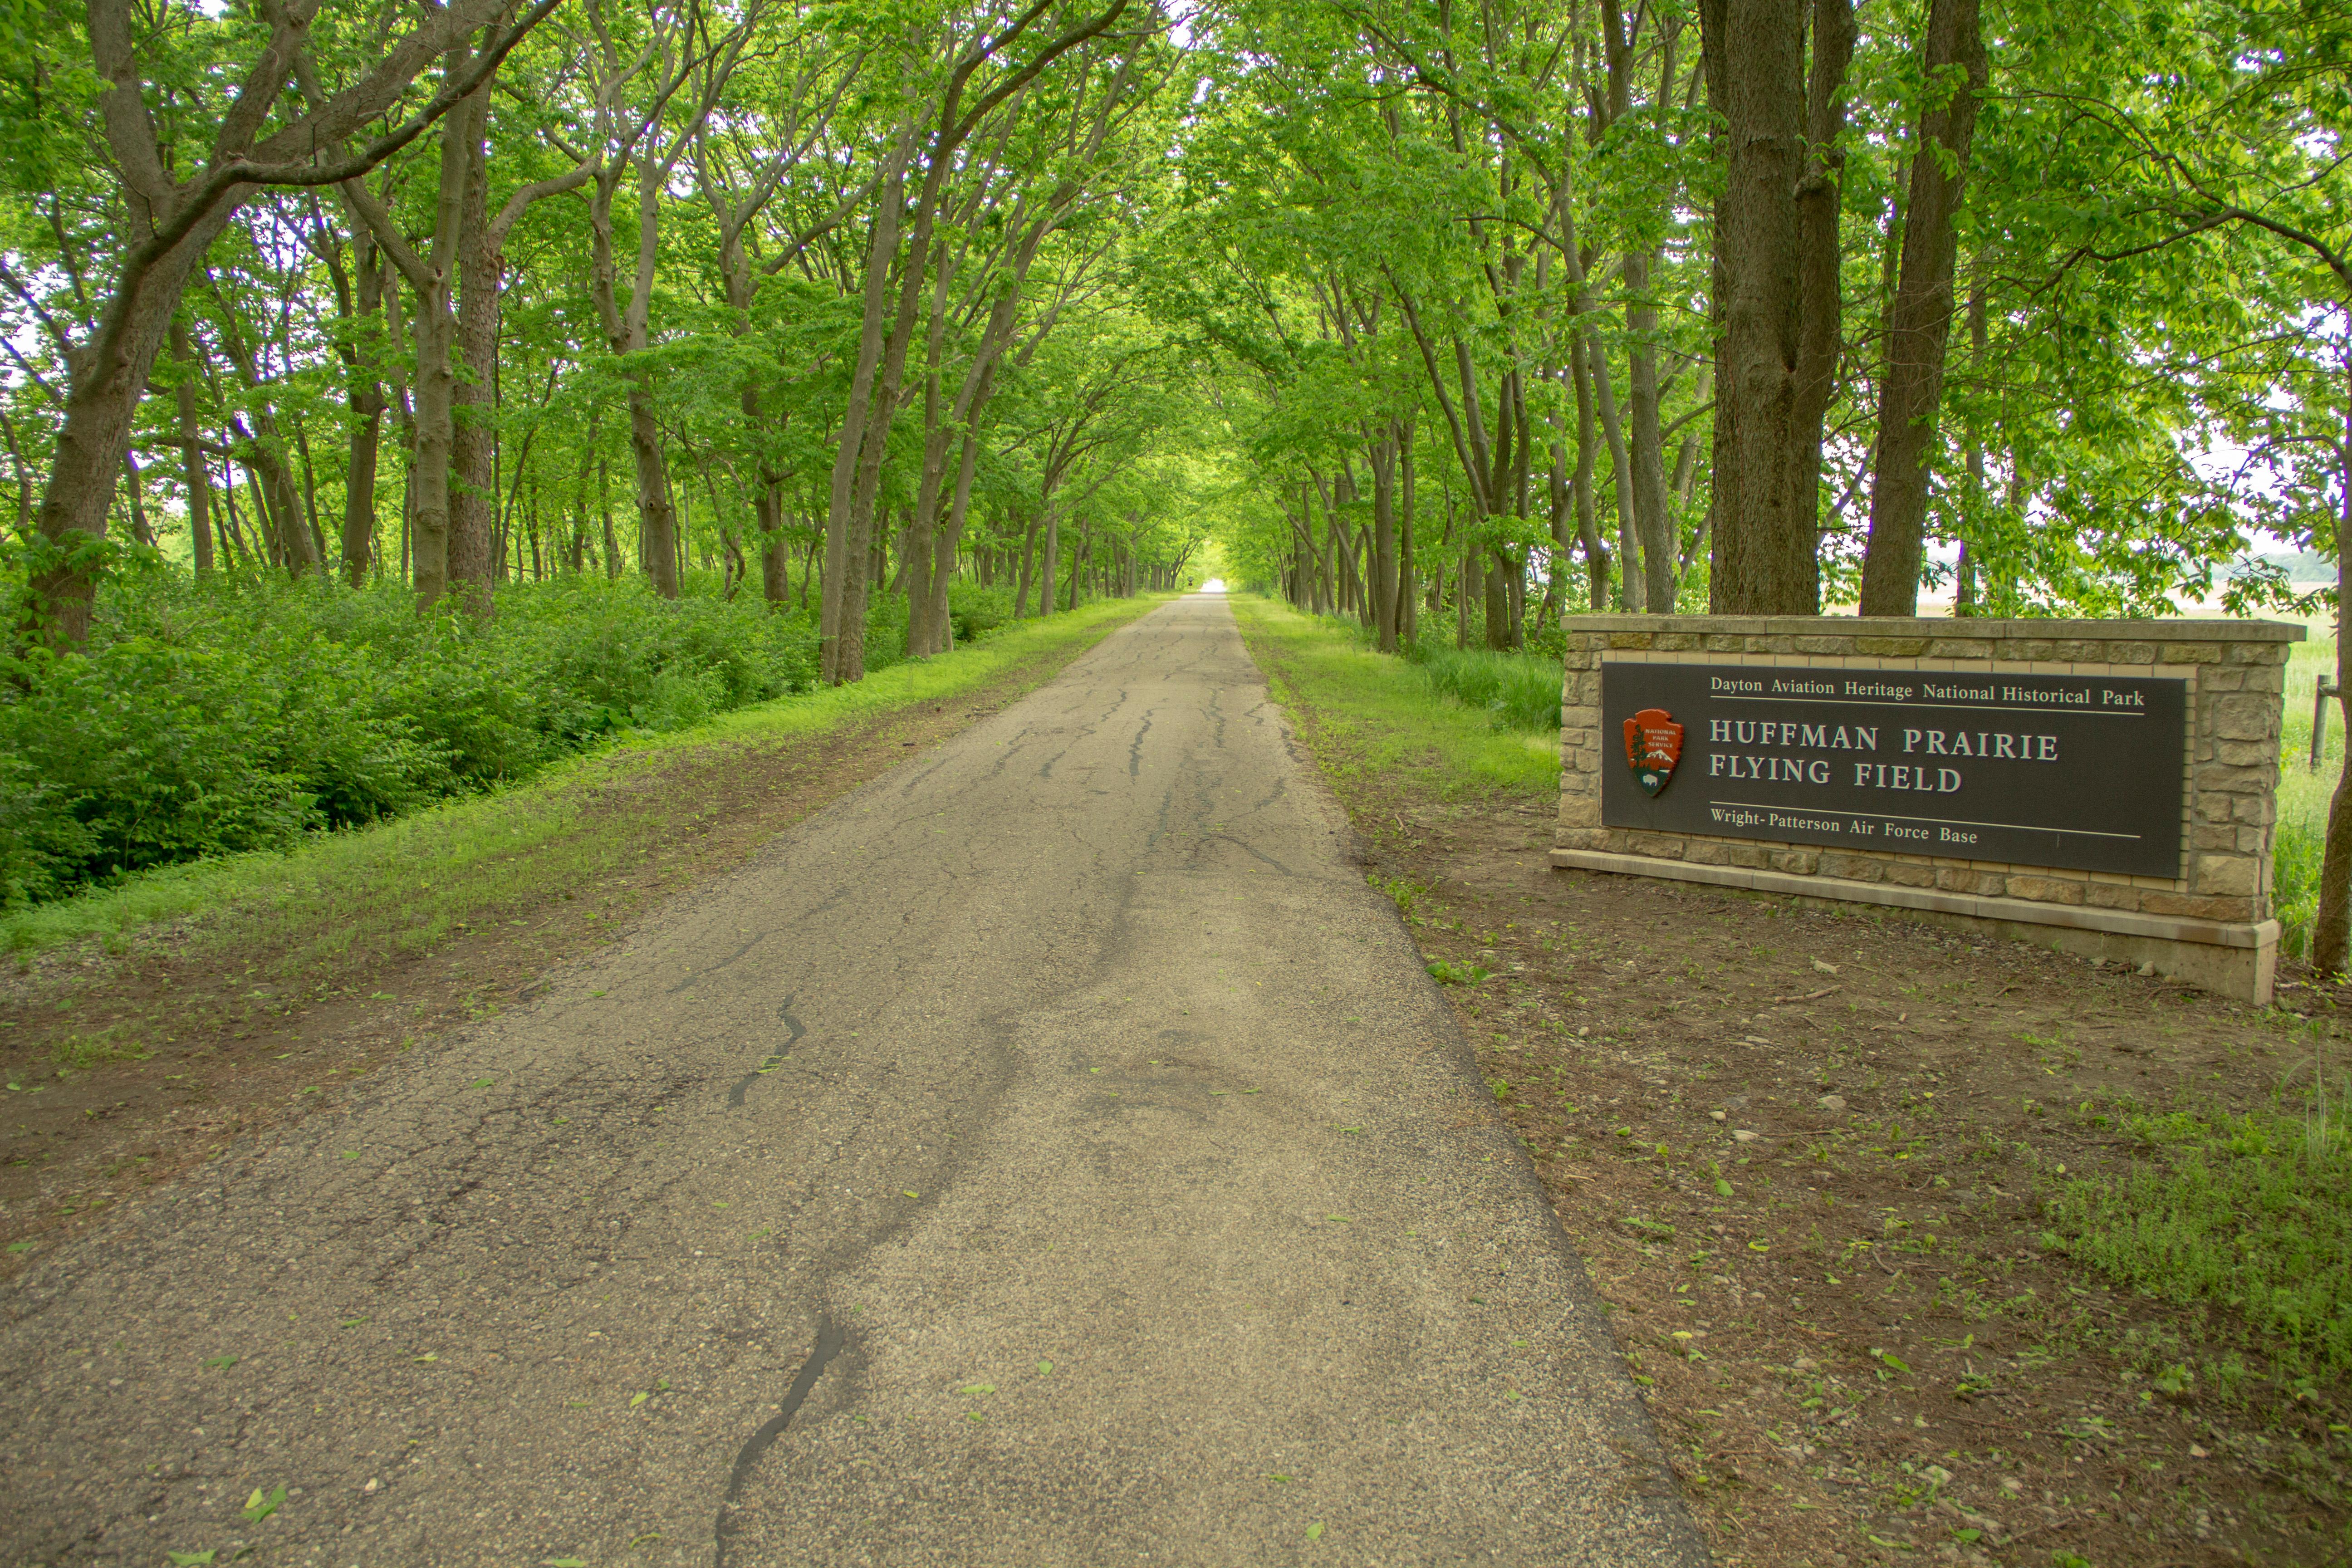 A dirt road between tall trees with a stone sign reading Huffman Prairie Flying Field.